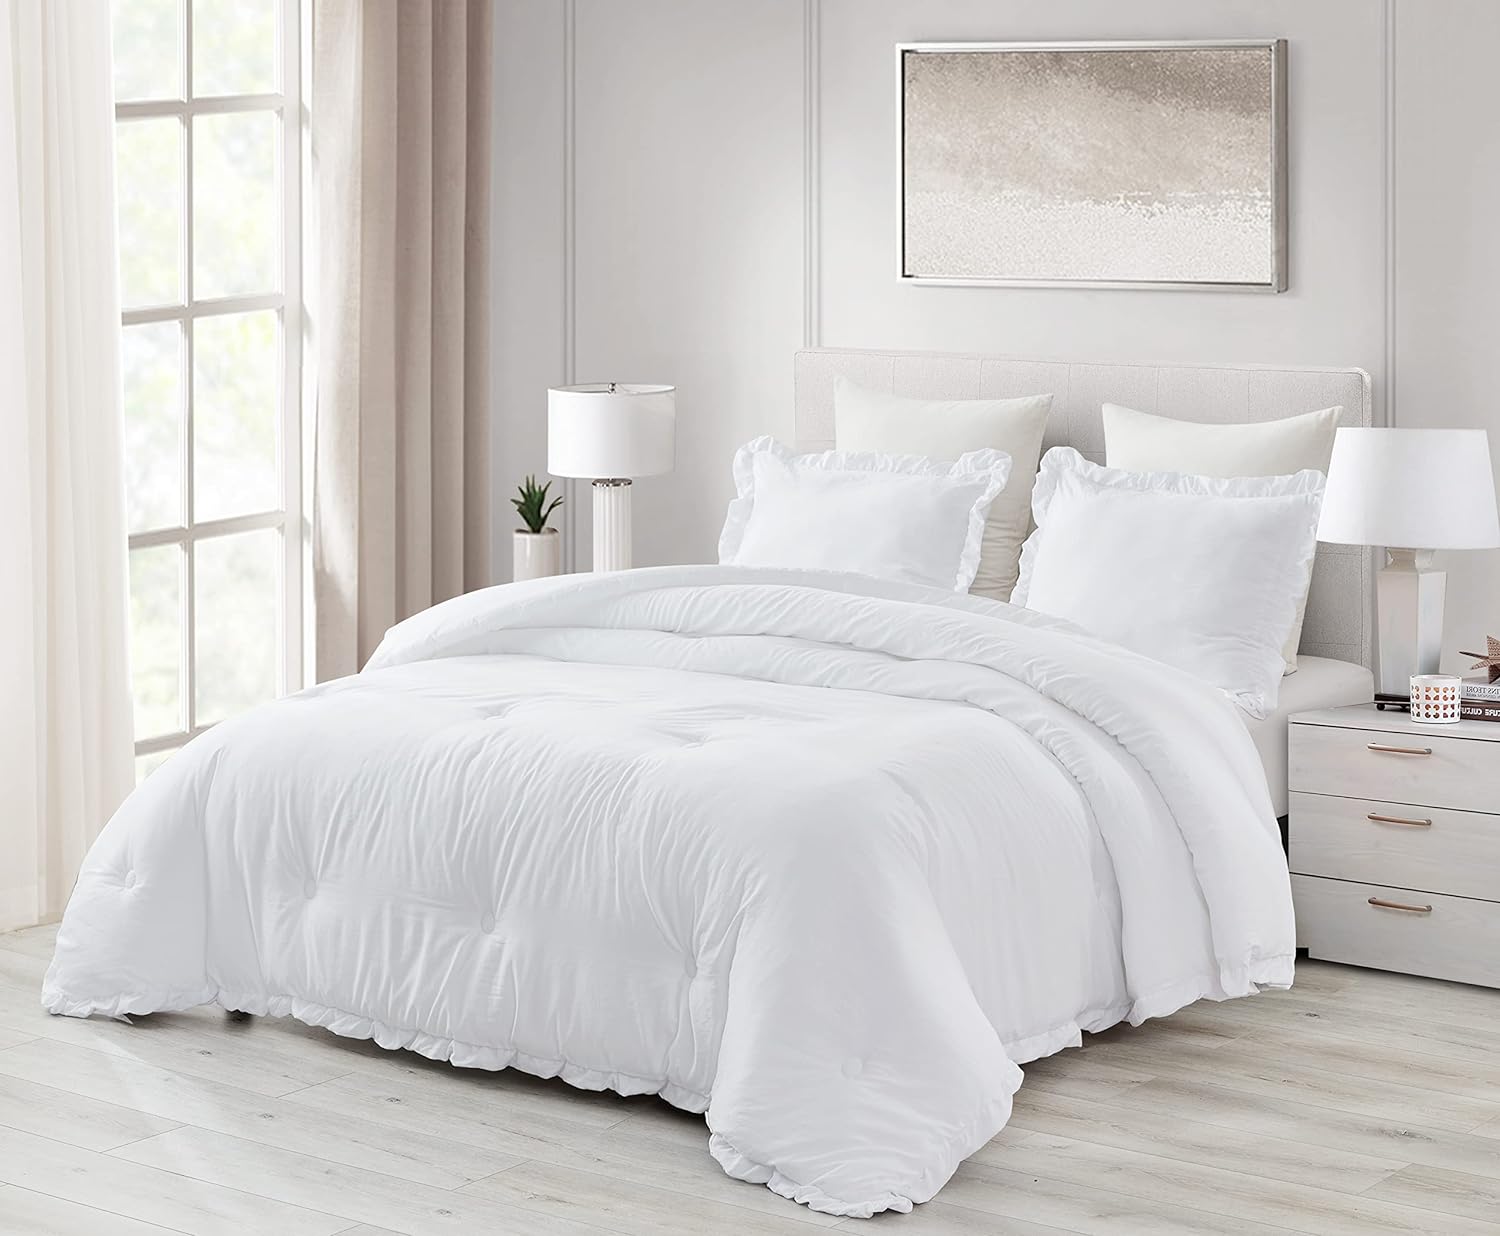 We bought this in hopes it was good quality, large and fit our bed adequately. It does all of the above and looks so nice. Its soft and comfortable, and keeps us warm! We love it so far!